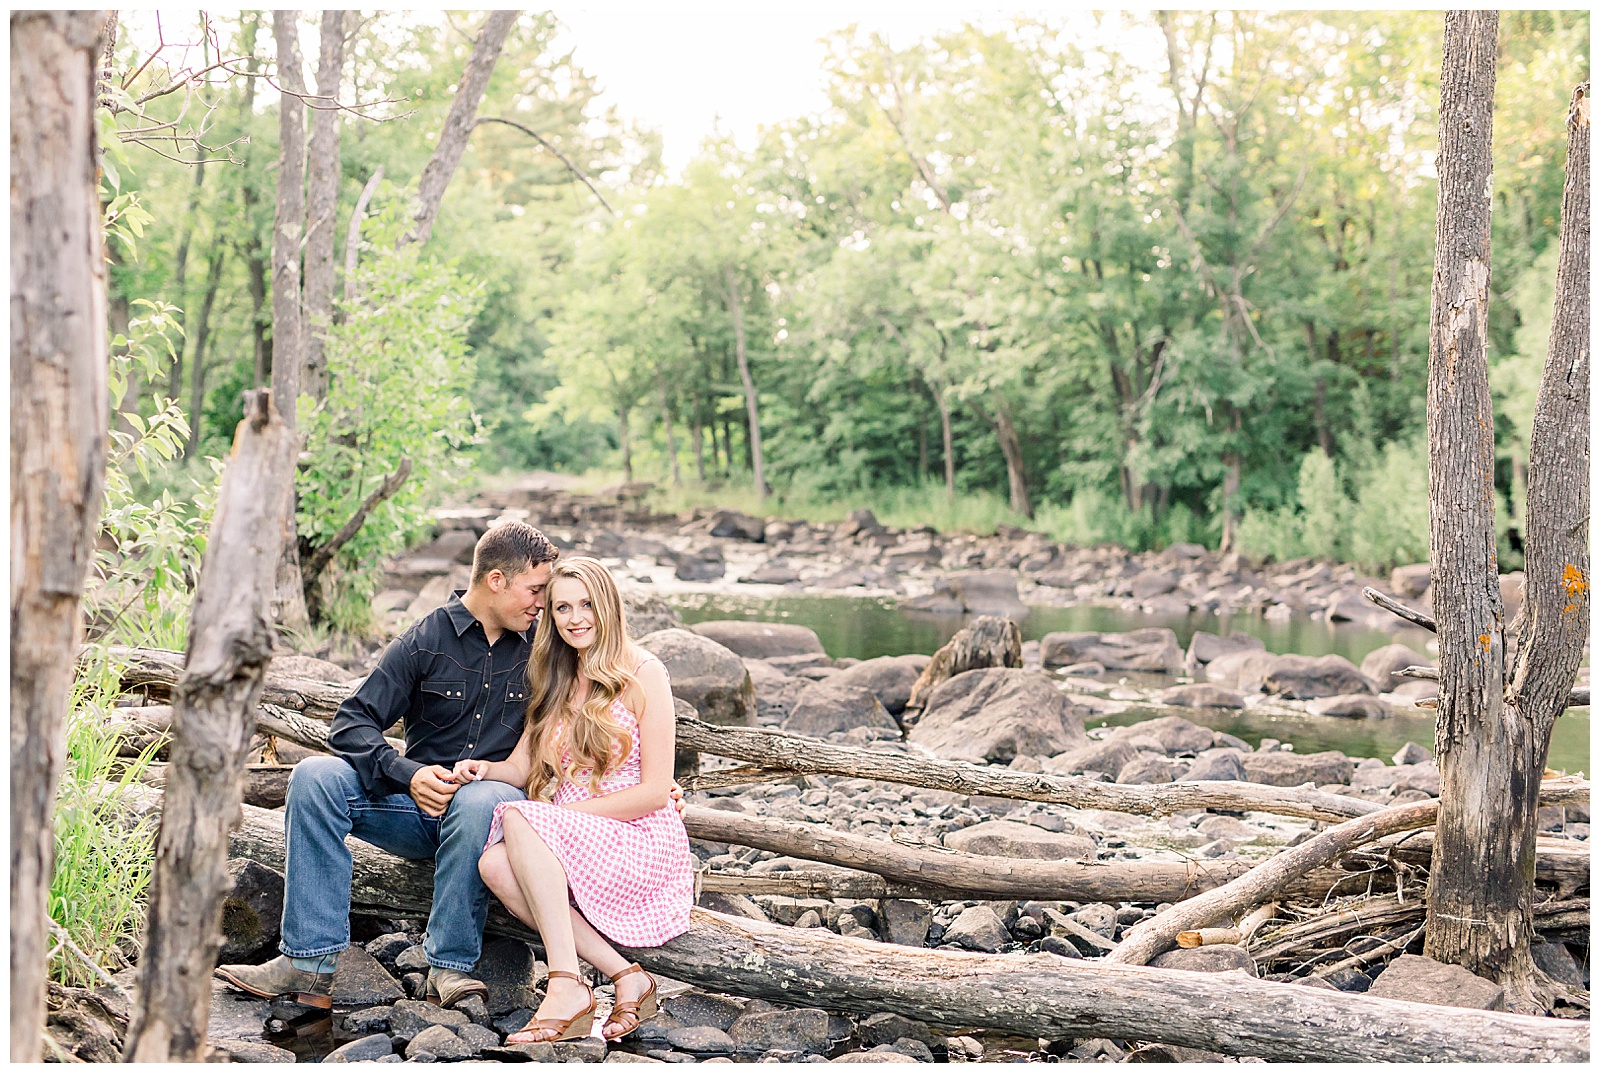 A Riverside Summer Engagement Session - Stephanie Holsman Photography